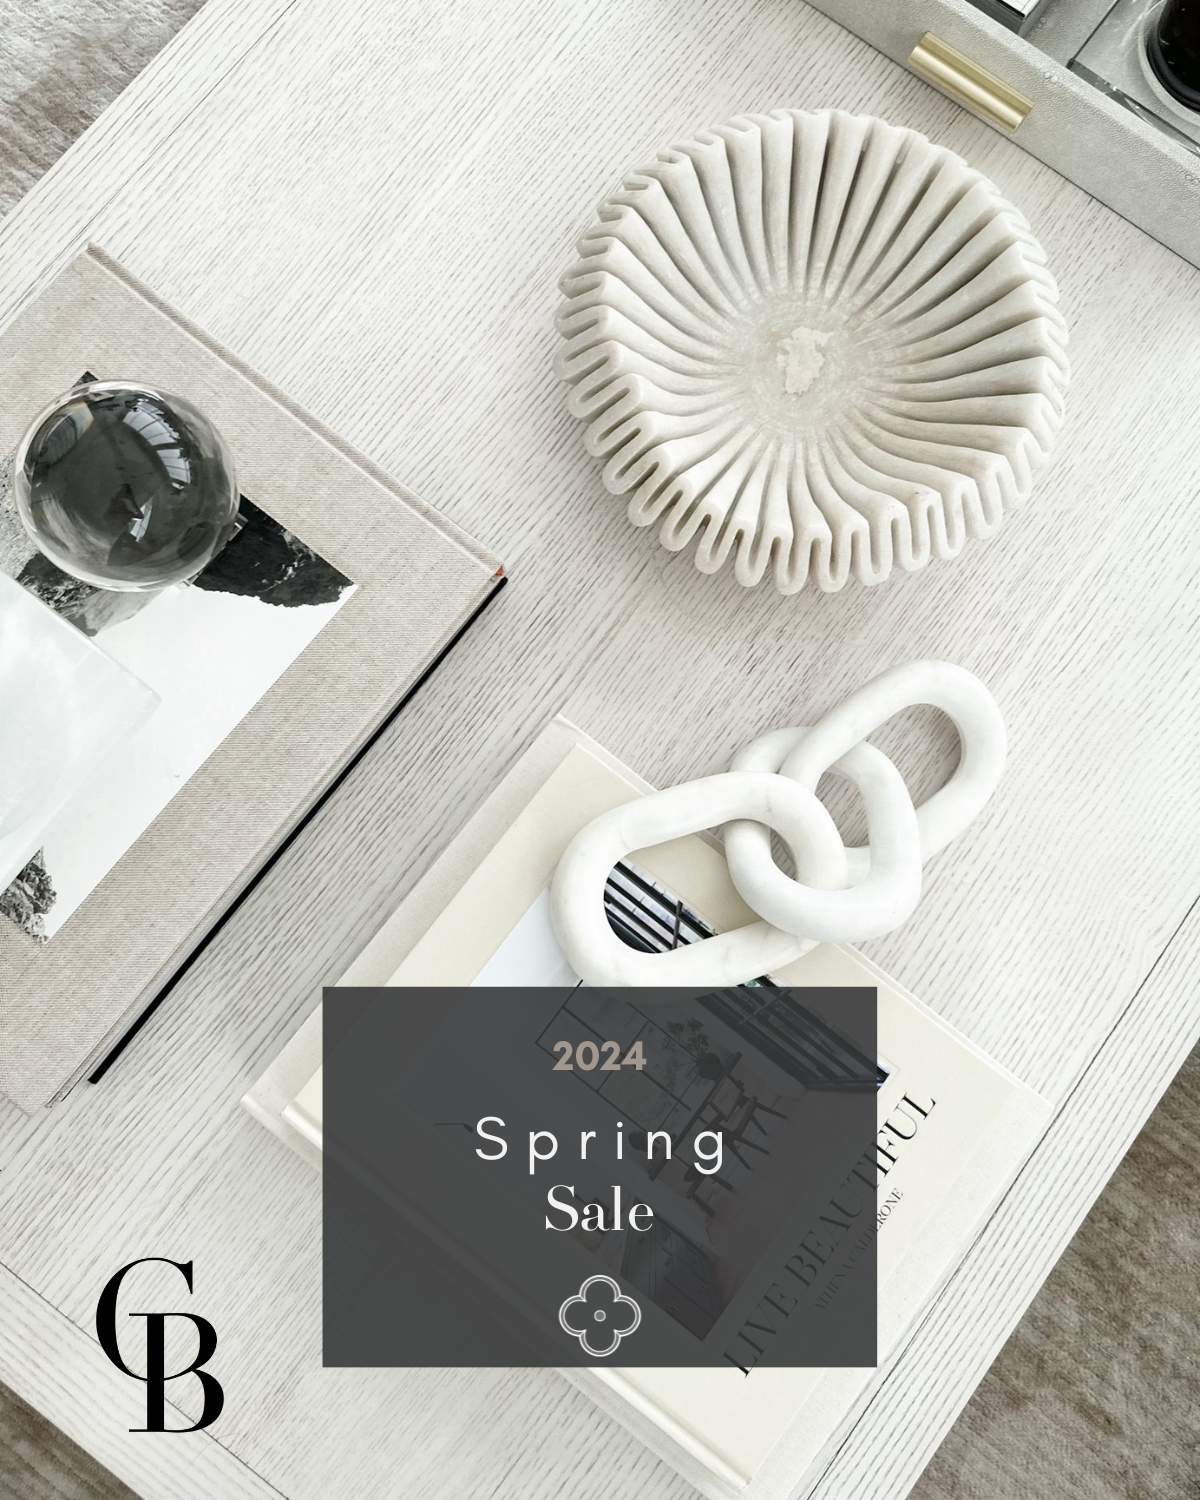 Spring Sale 2024 featured image, featured image, spring decor, spring essential, spring gadget, home, spring home, kitchen, kitchen appliances, spring sale, sale